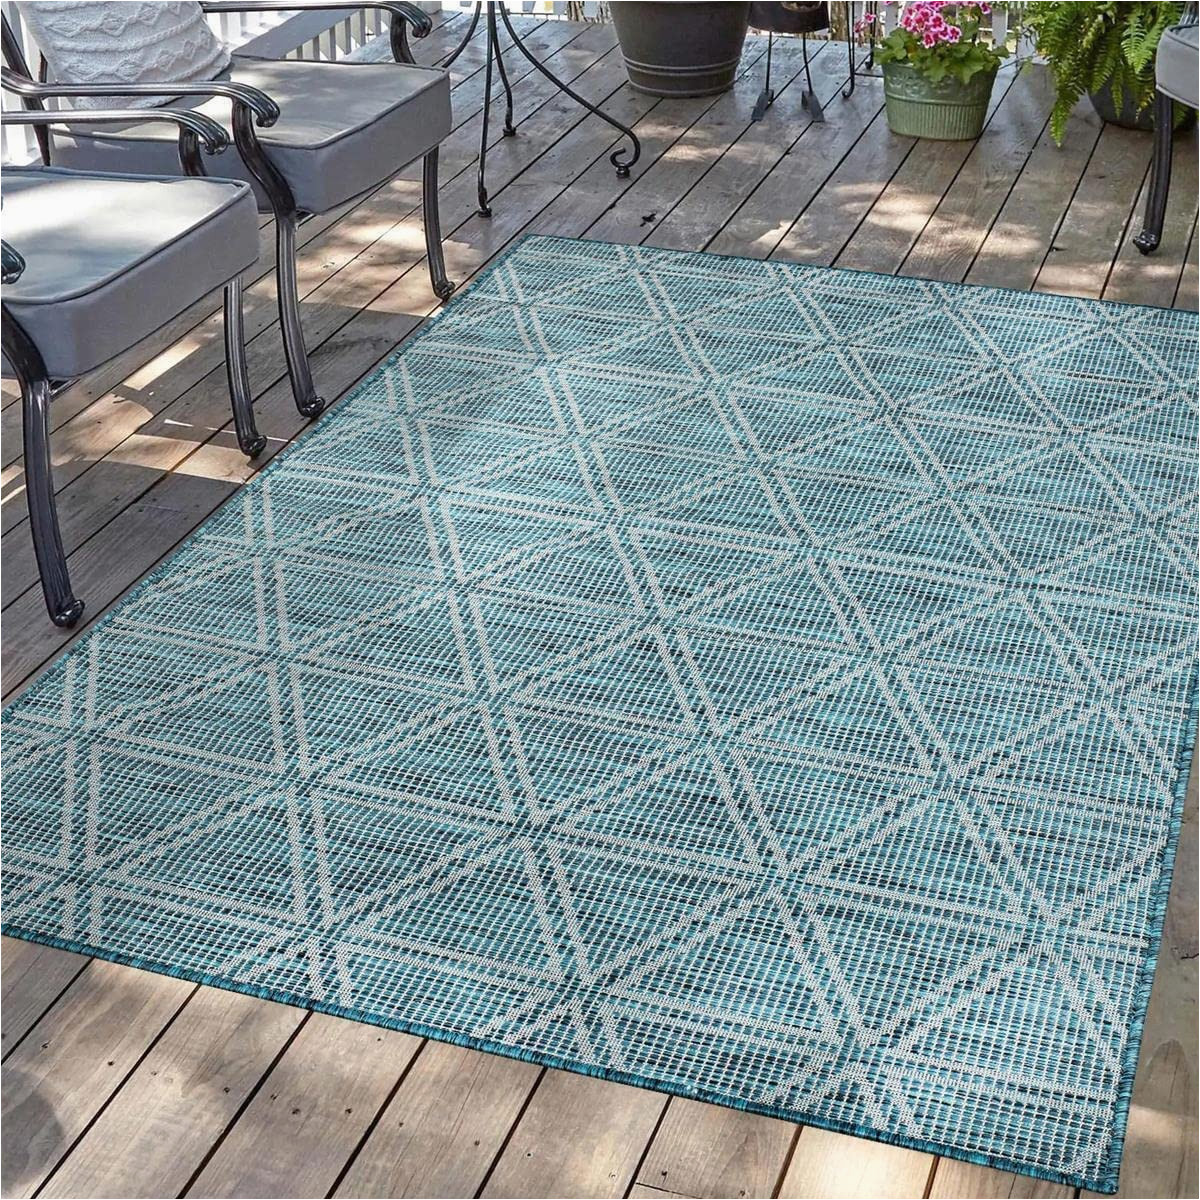 Outdoor area Rugs Near Me Carpet City Outdoor Rug Patio Weatherproof 100 X 200 Cm Balcony Rug Blue Petrol Geometric Pattern Indoor and Outdoor Rugs for Porch, Garden, Kitchen, …